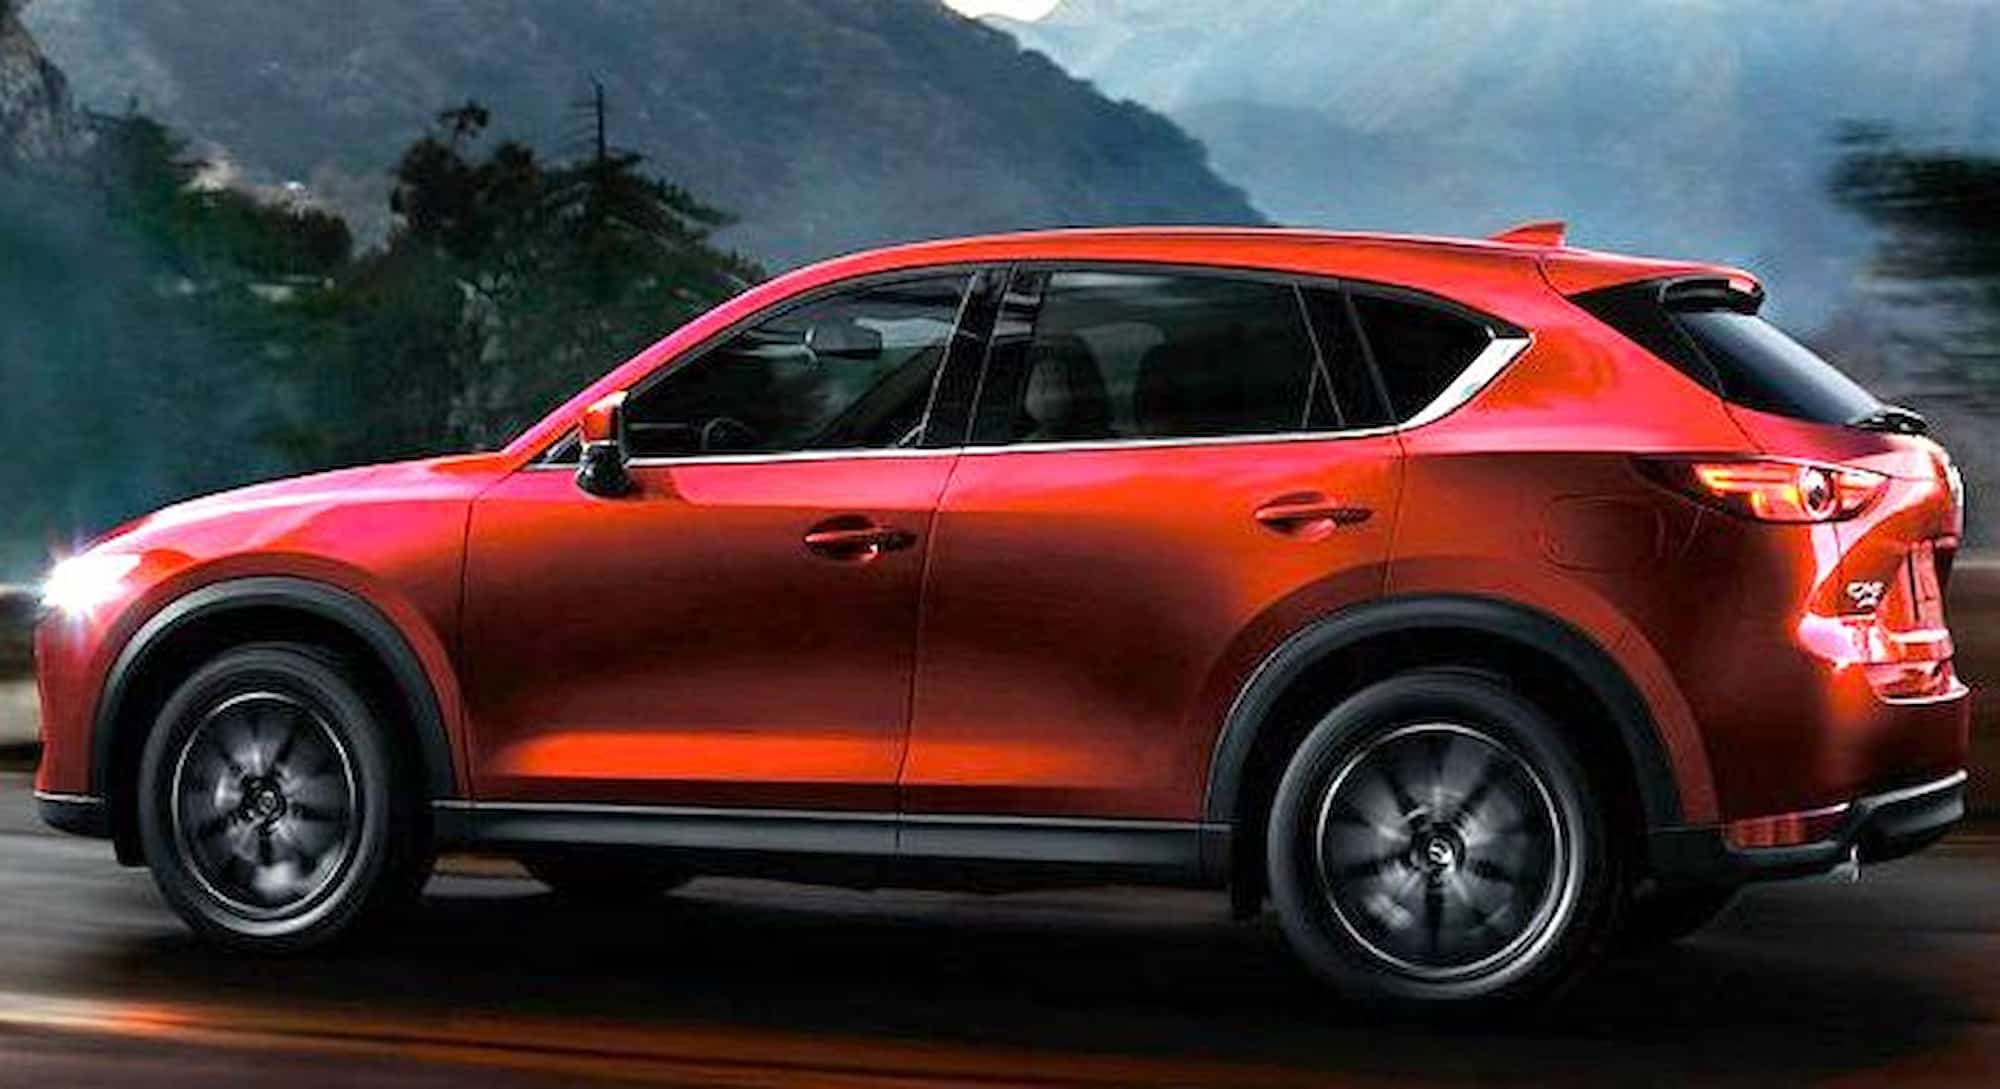 2018 Mazda CX 5 Updates and New Features Maple Shade Mazda o 1038x375 1